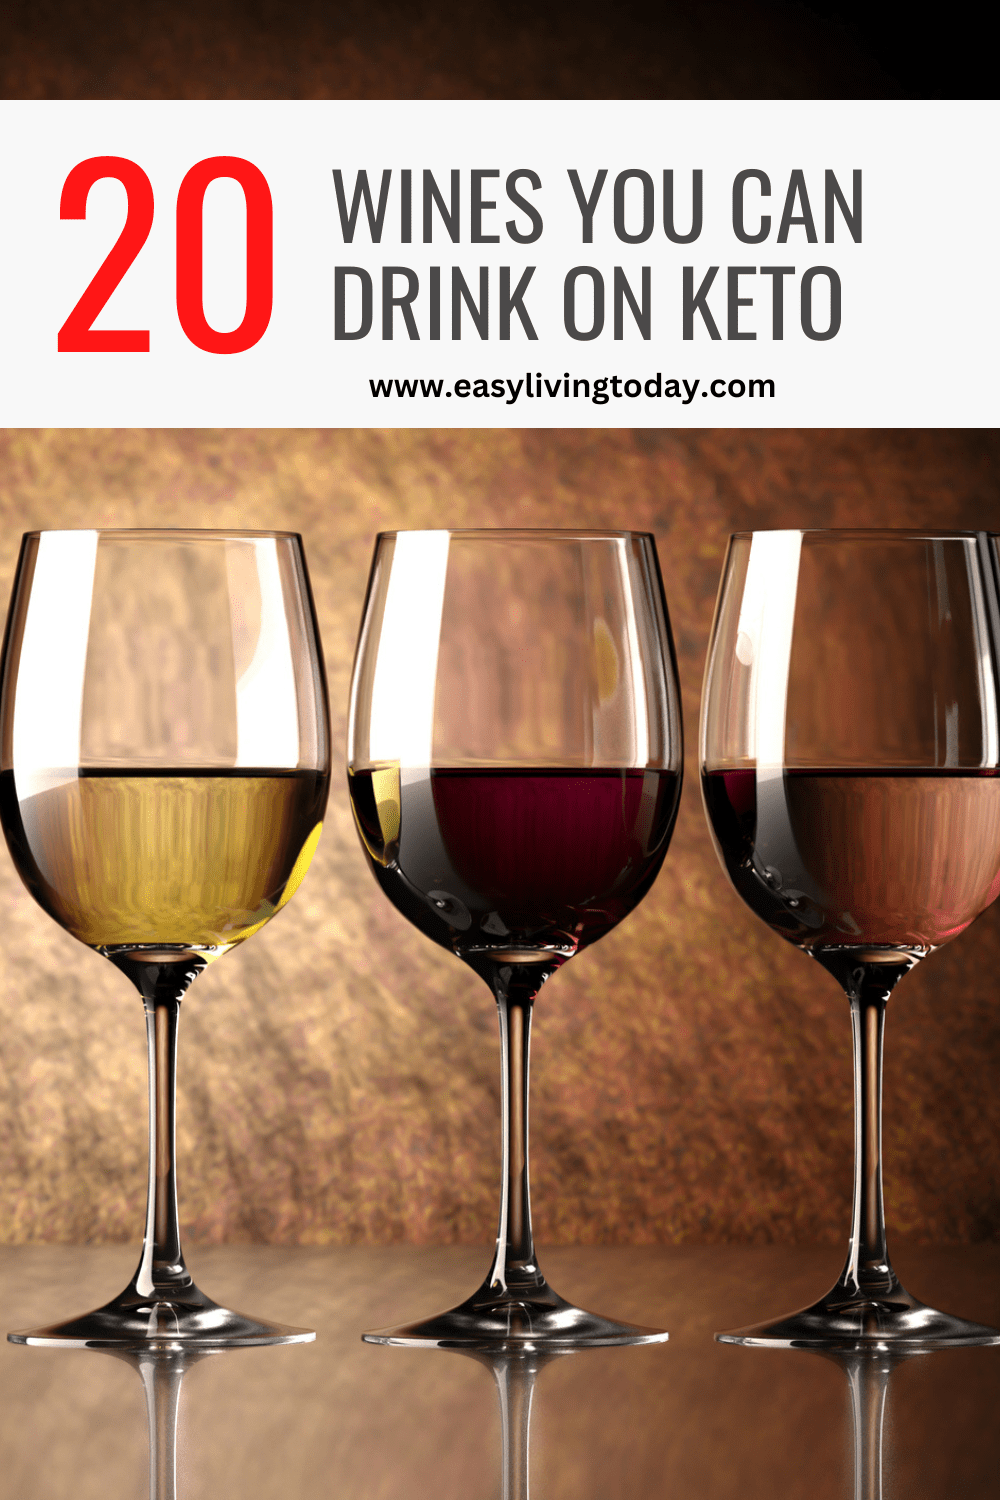 20 wines you can drink on keto